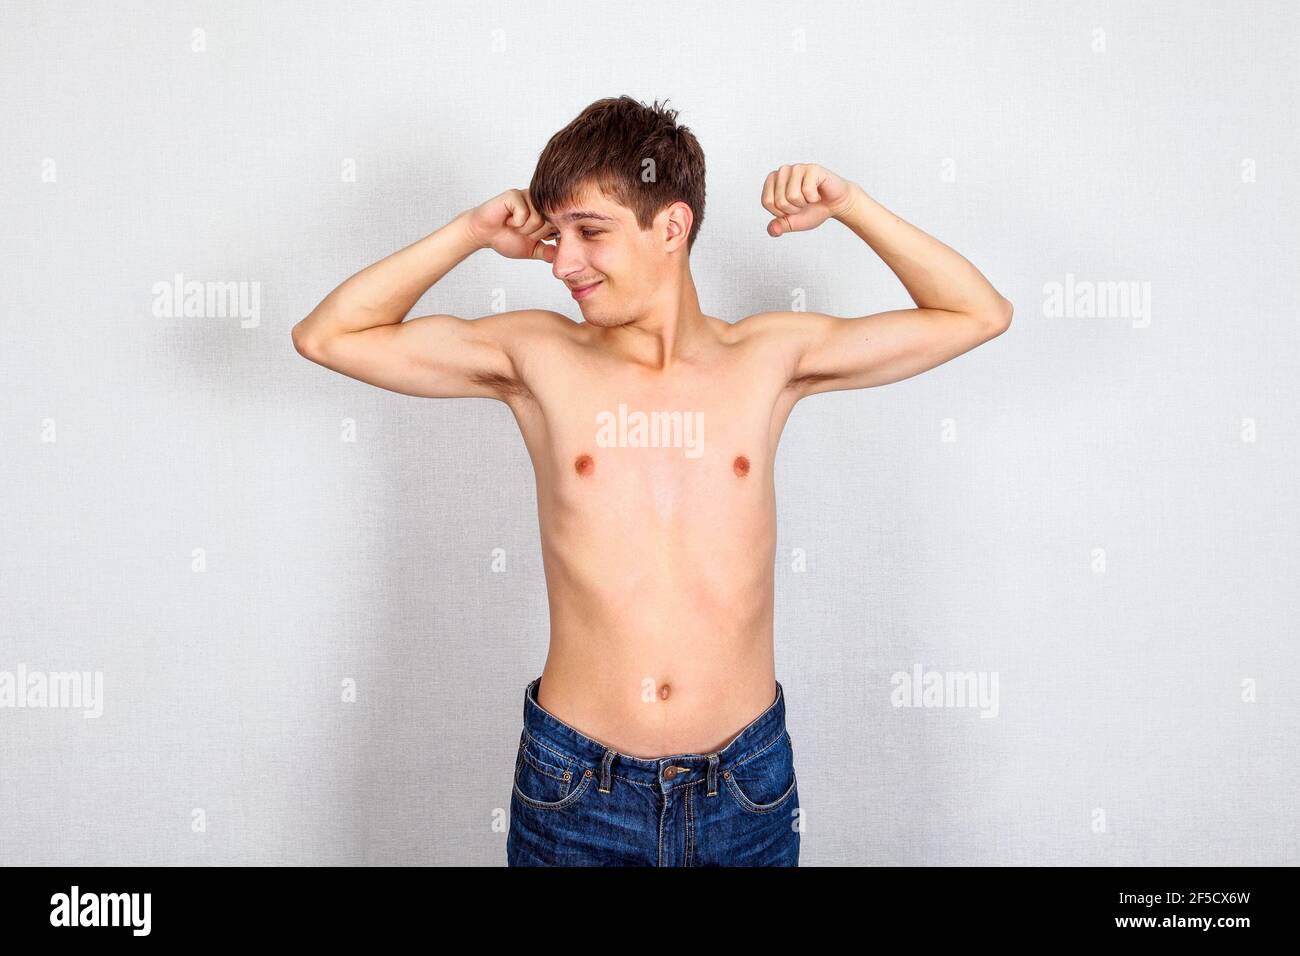 Skinny Young Man Muscle Flexing on the White Wall Background Stock Photo -  Alamy